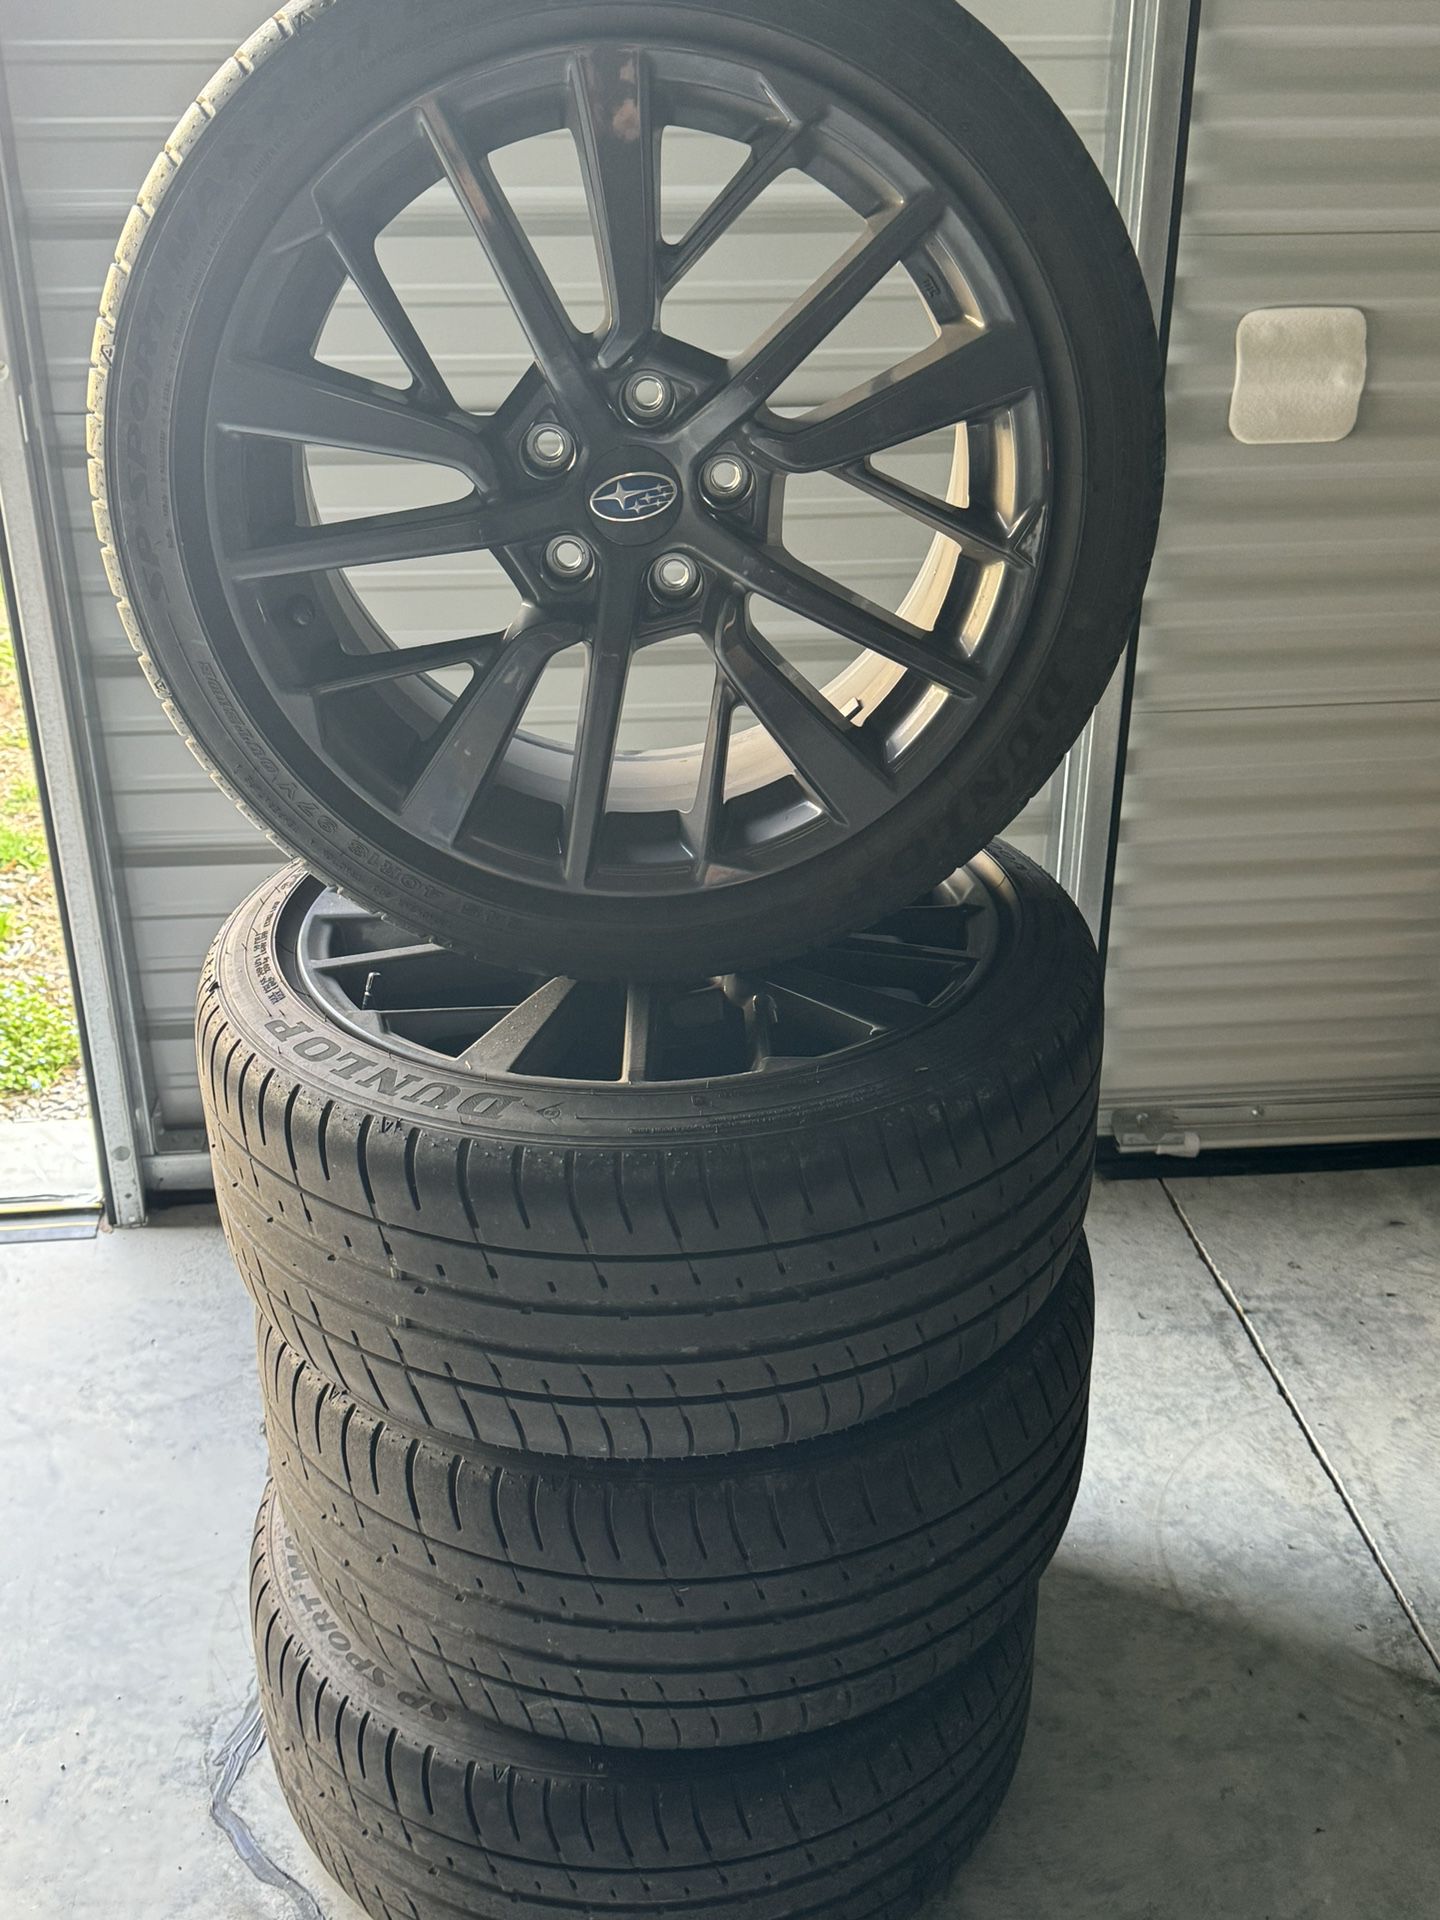 245/40R18 Tires And Rim 